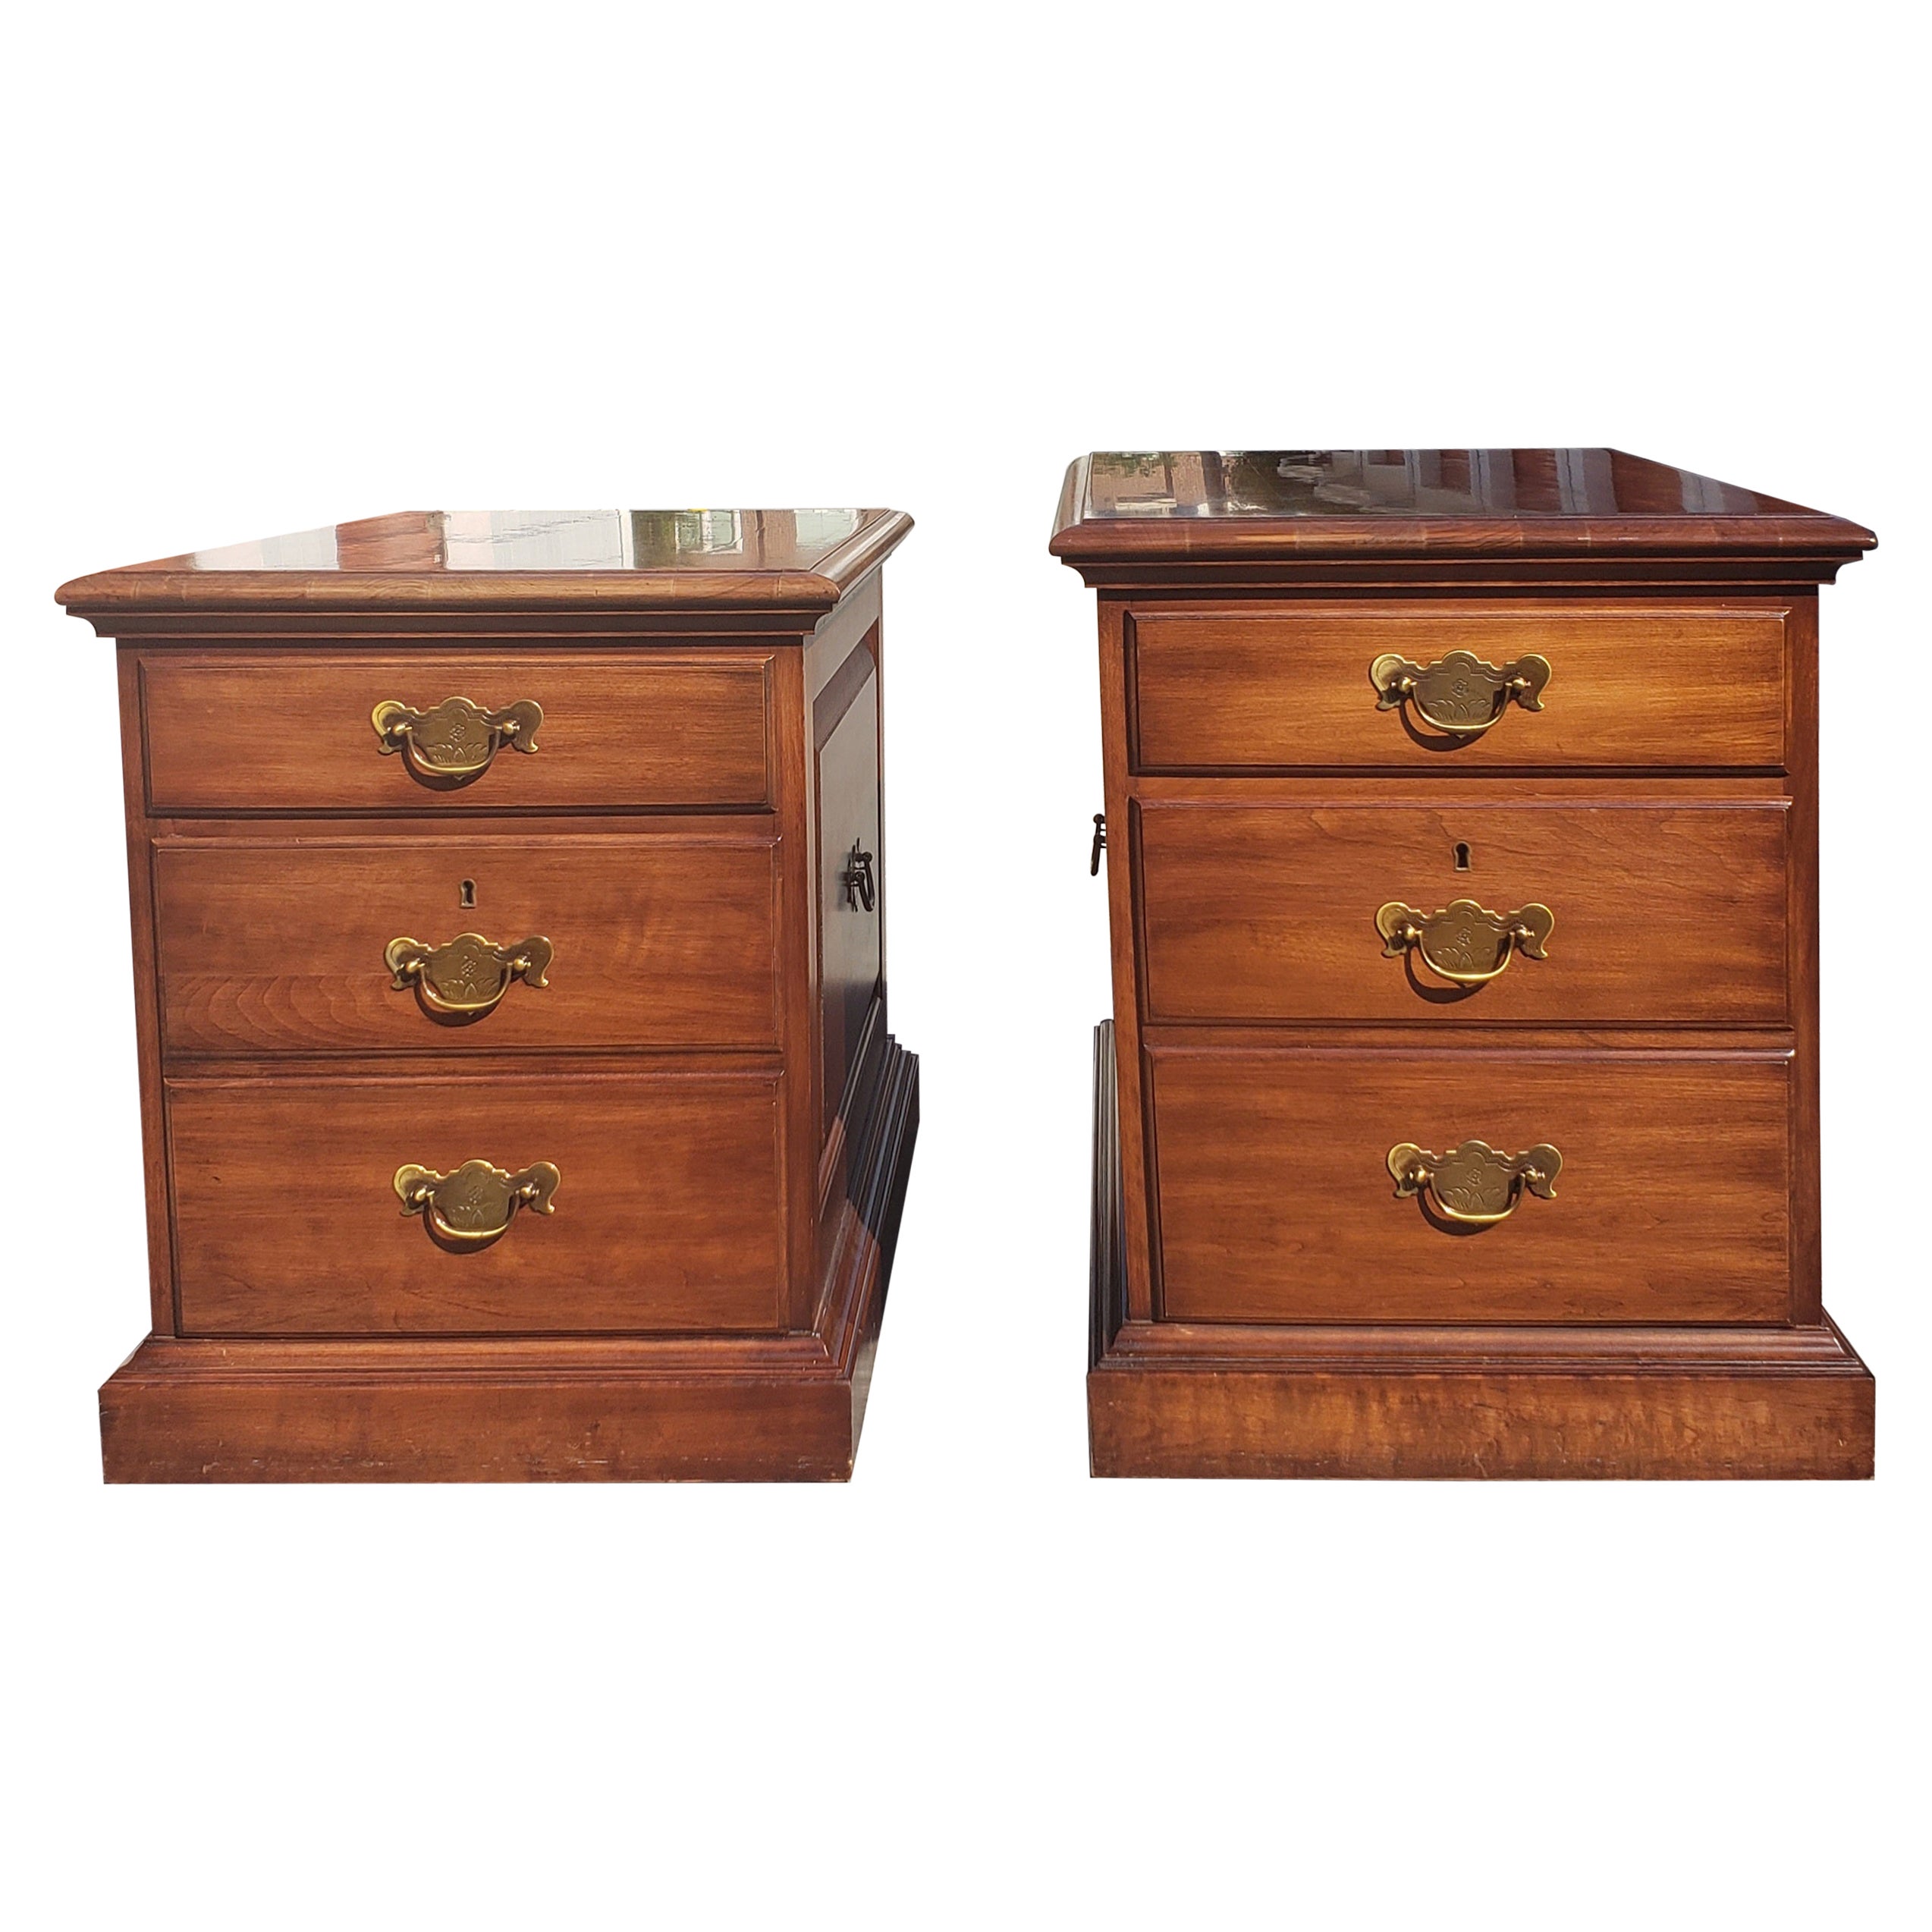 Pennsylvania House Executive Chippendale Solid Cherry Filing Cabinet, Pair 1970s